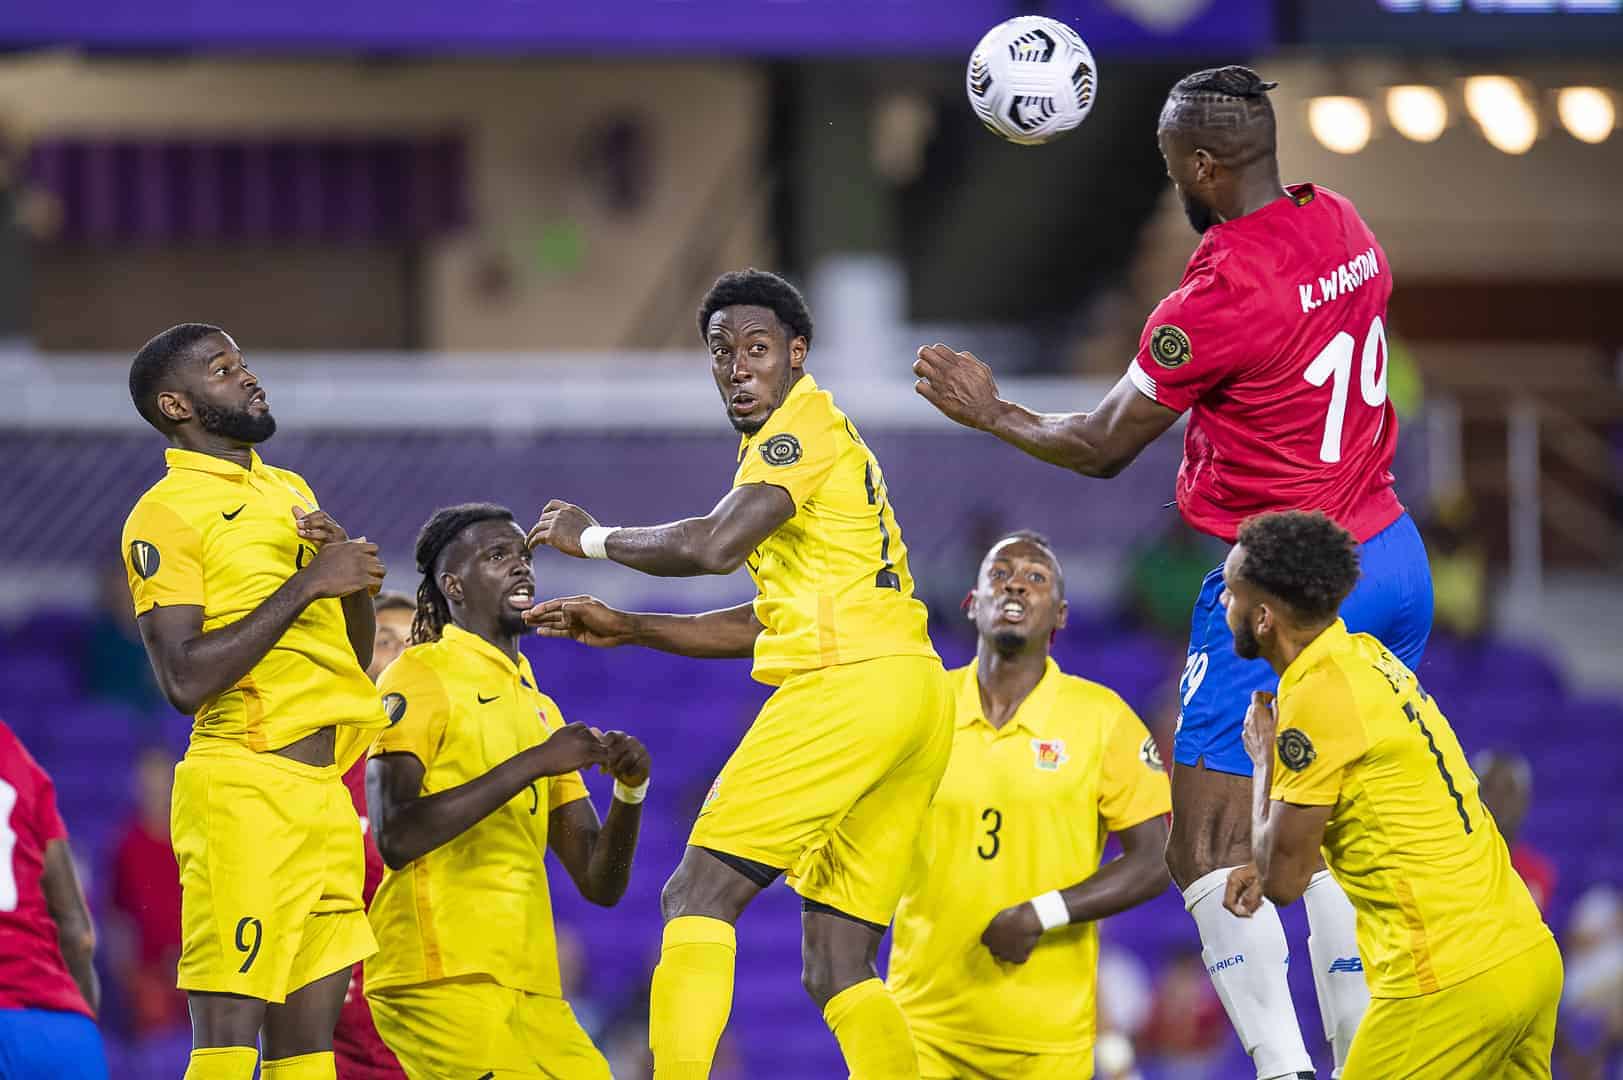 Kendall Waston skies for a header in the Gold Cup against Guadeloupe on July 12, 2021.